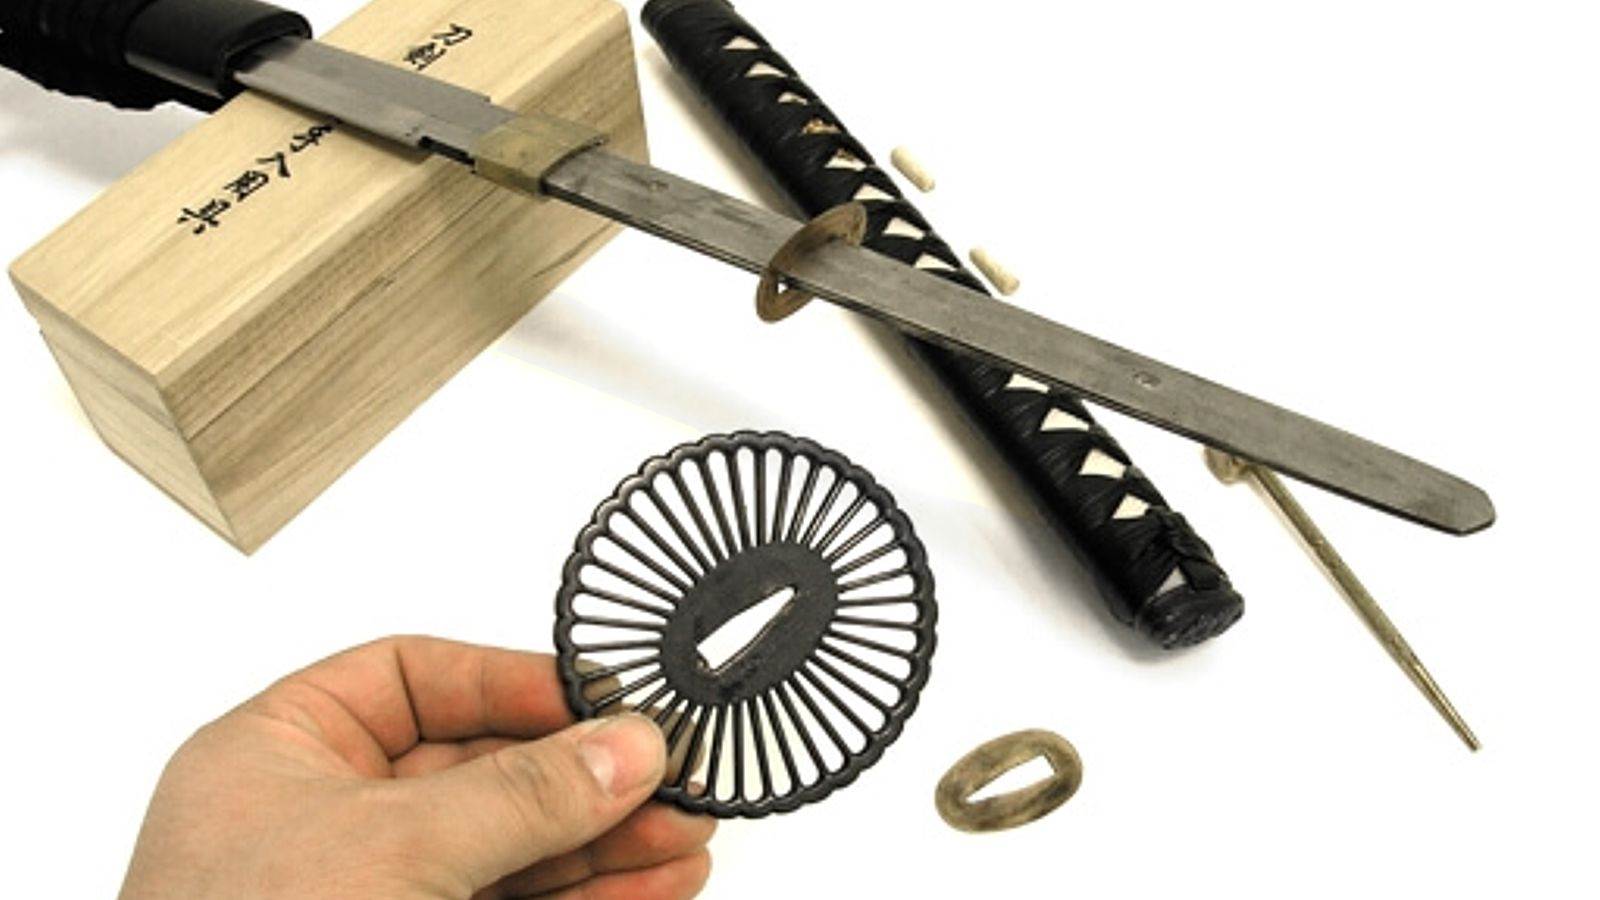 6 Simple Steps to Break Down or Disassemble Your Katana 